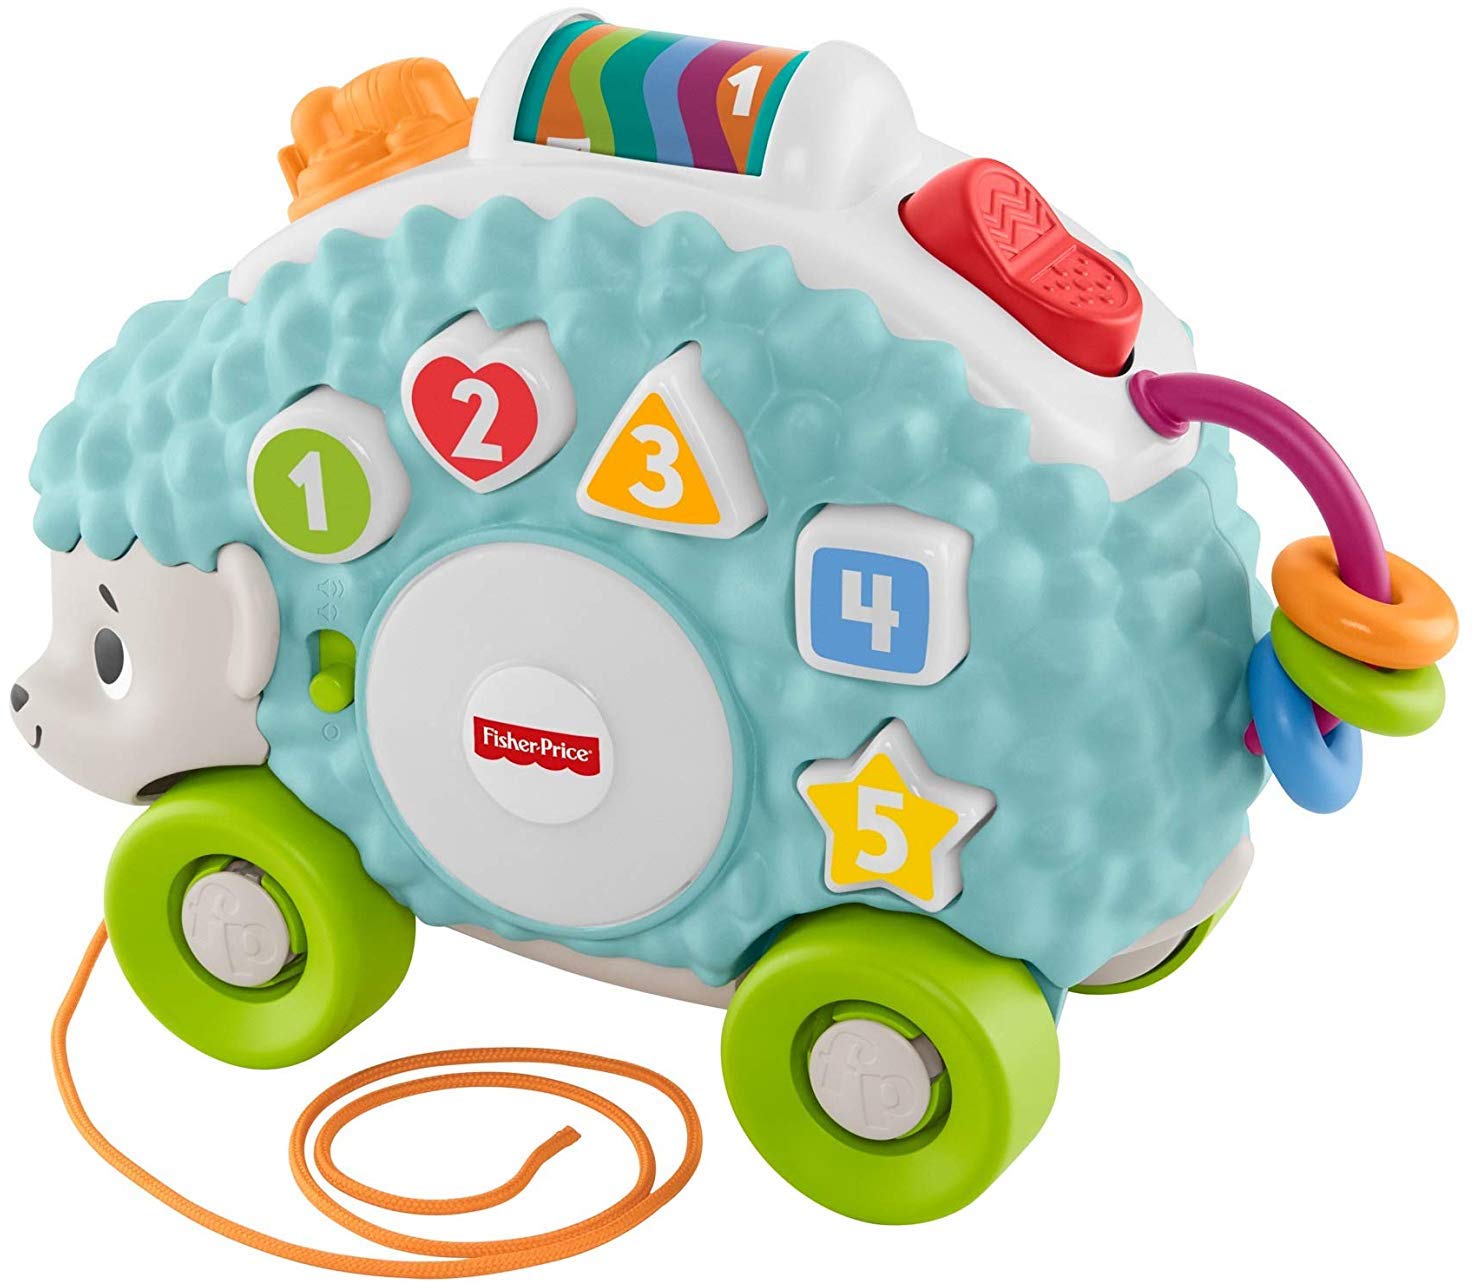 Fisher-Price Linkimals Happy Shapes Hedgehog - Interactive Educational Toy with Music and Lights for Baby Ages 9 Months & Up, Multi Color